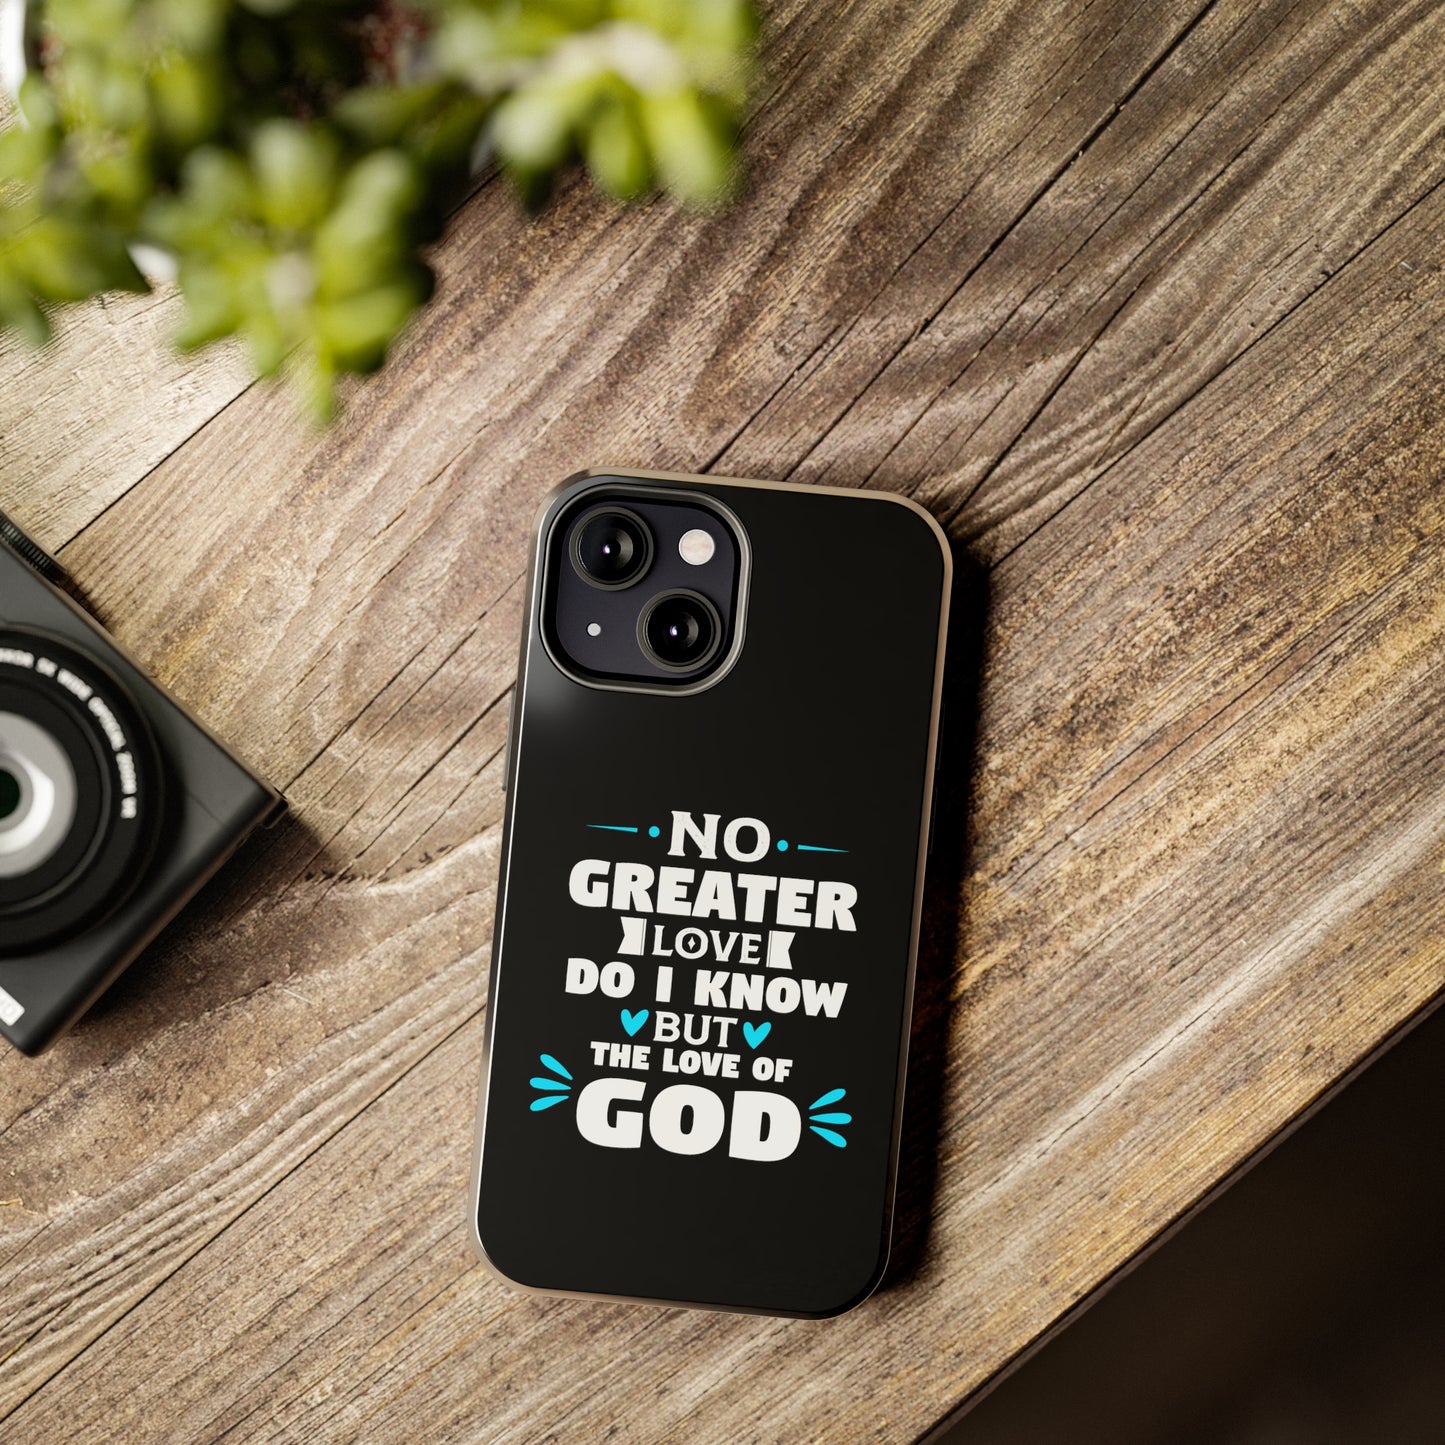 No Greater Love Do I Know But The Love Of God Tough Phone Cases, Case-Mate